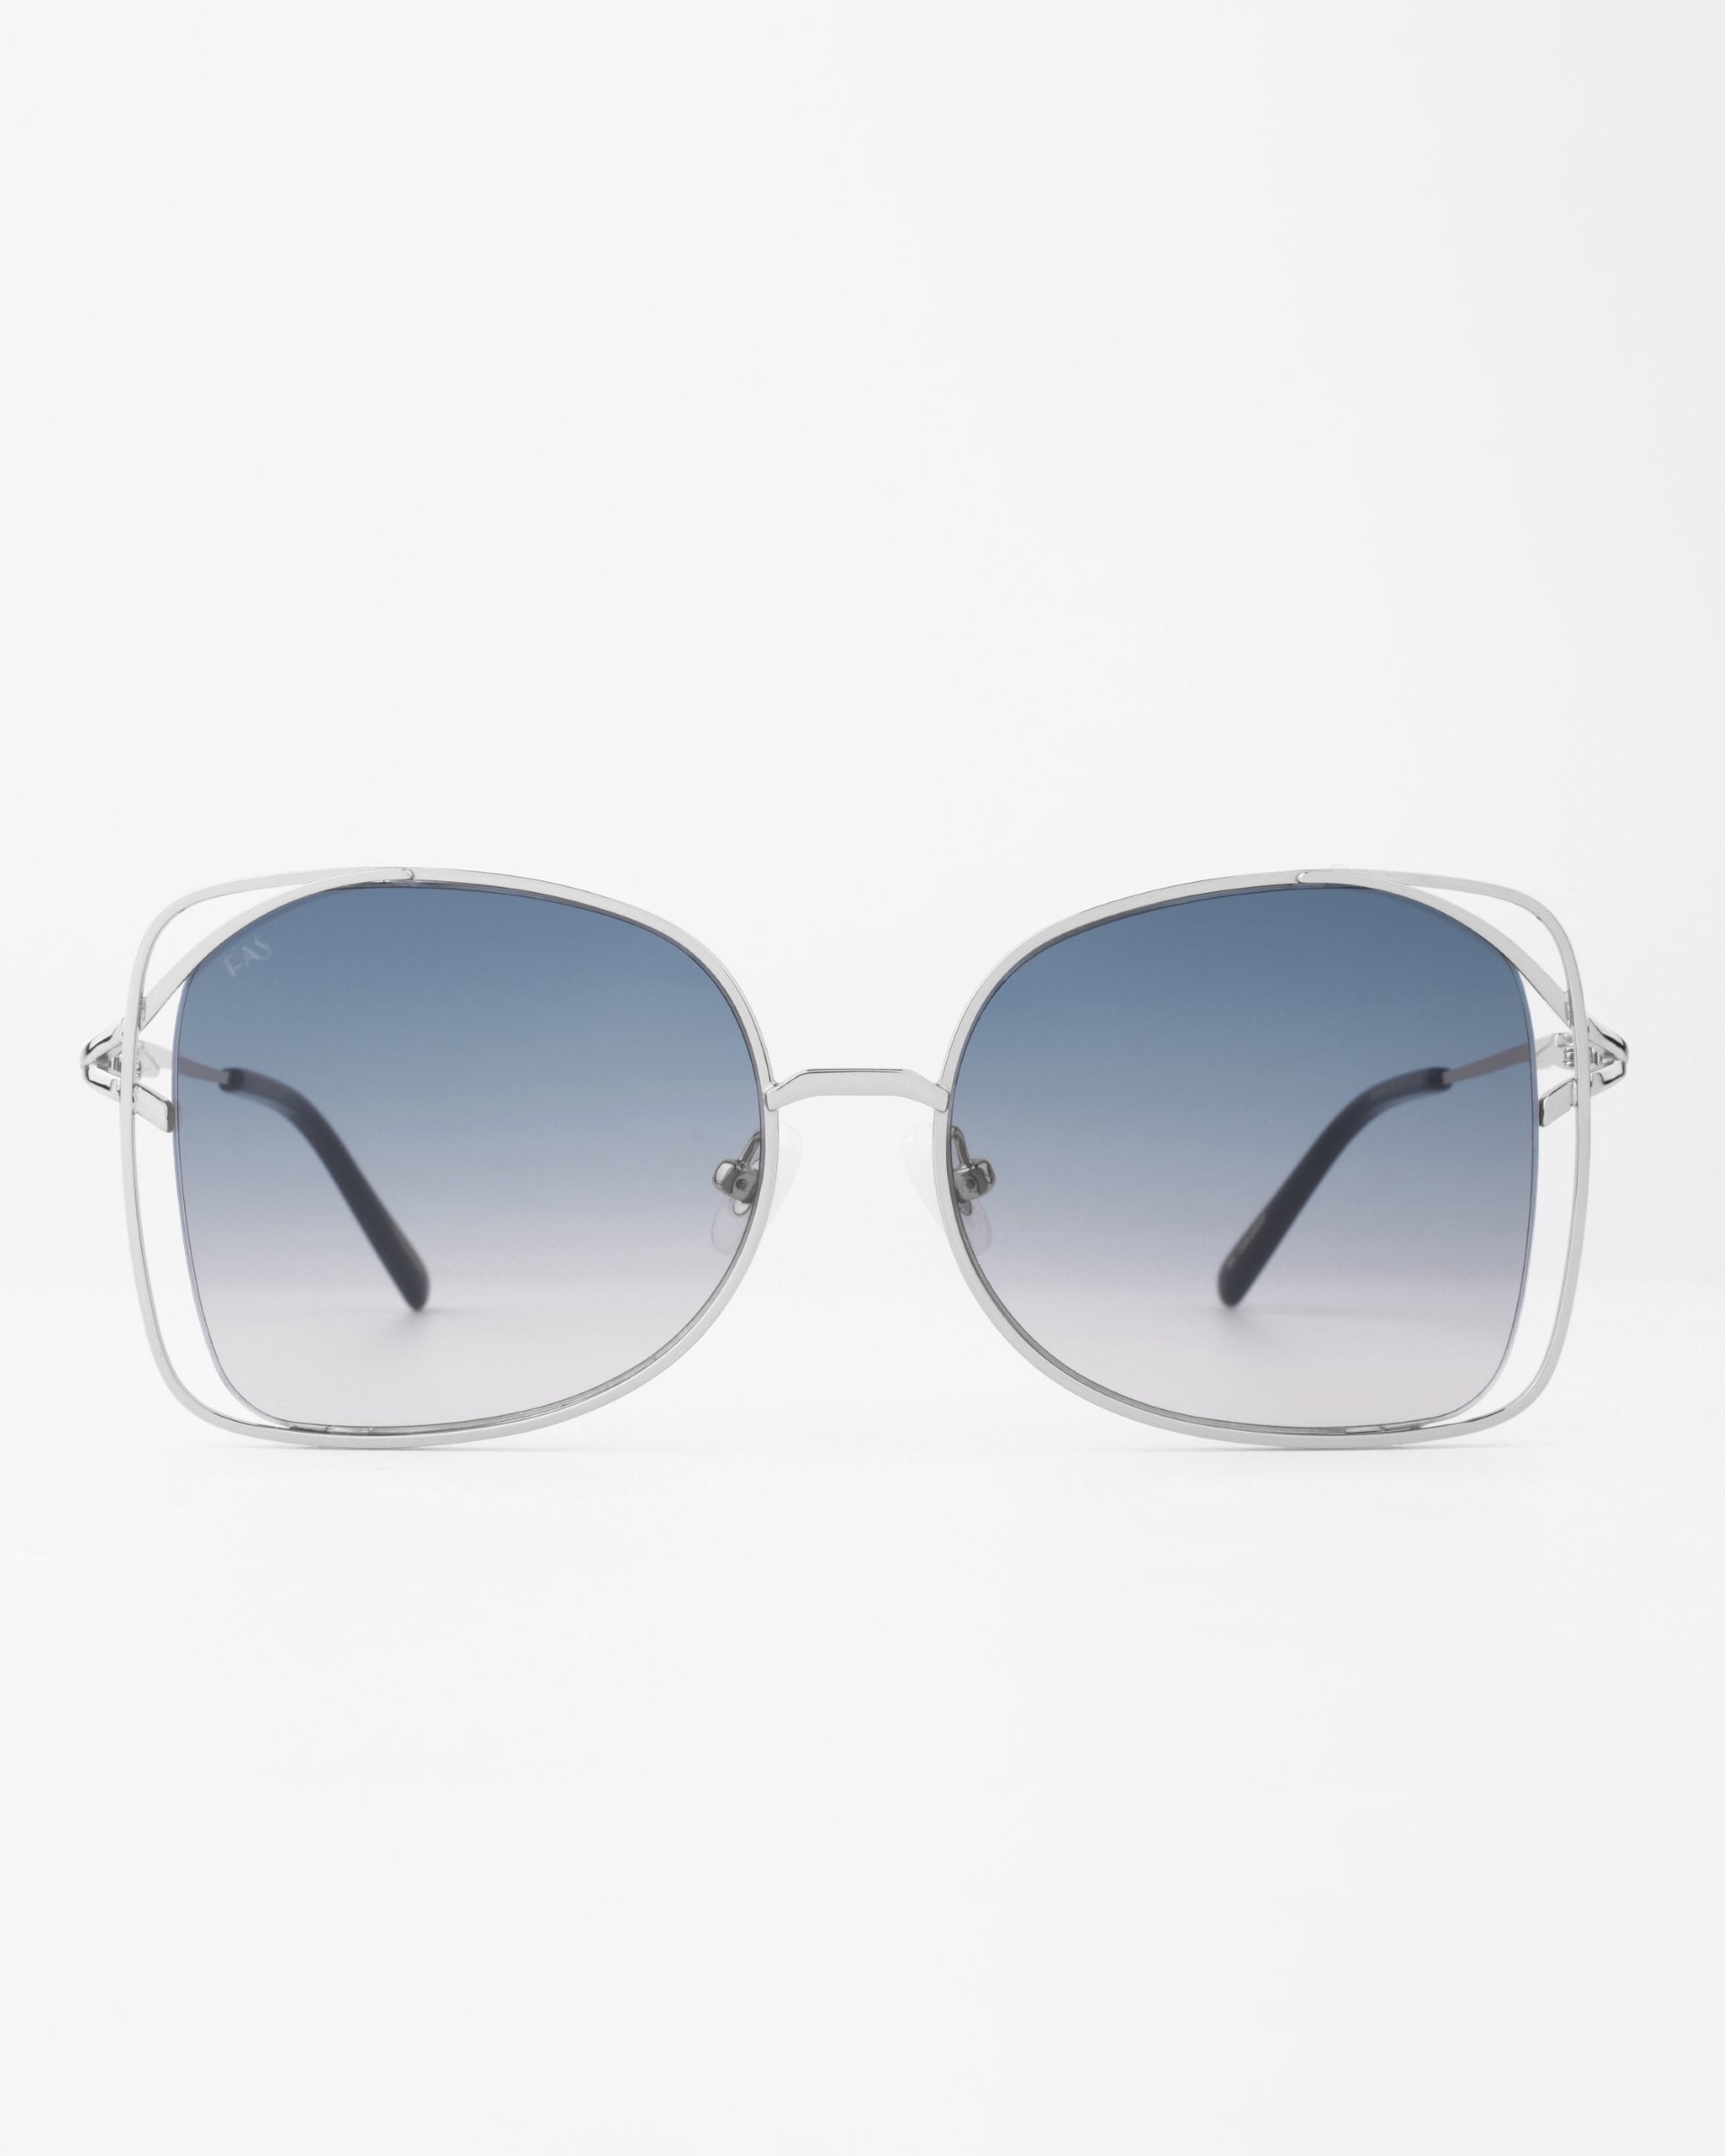 A pair of oversized, handmade Carousel sunglasses from For Art&#39;s Sake® with rounded square frames made of thin silver metal. The gradient lenses transition from dark blue at the top to clear at the bottom, providing UVA &amp; UVB protection. The sunglasses feature thin arms with black tips. The background is plain white.